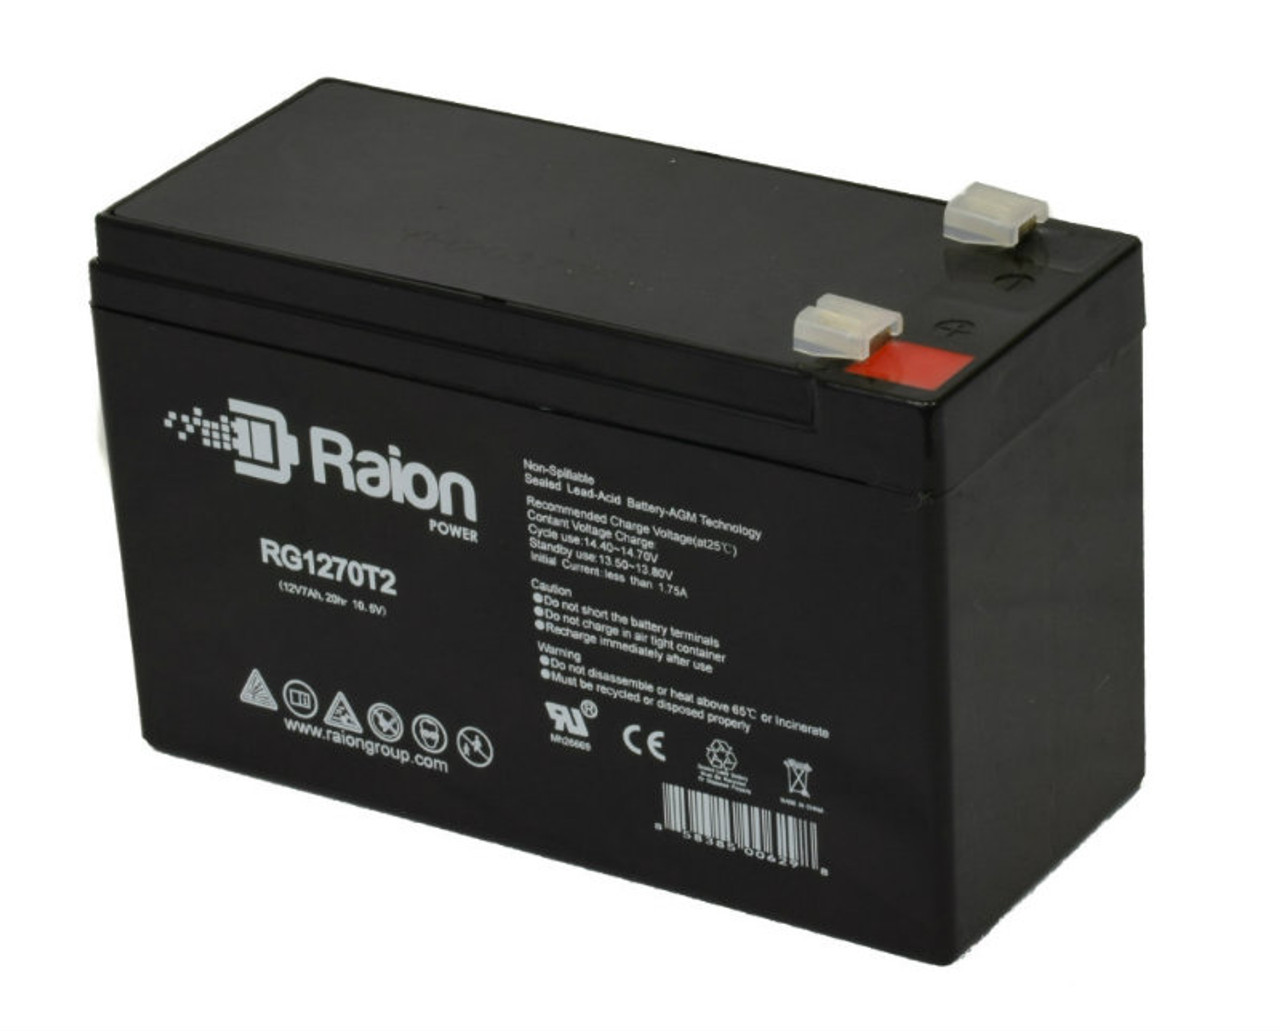 Raion Power RG1270T2 12V 7Ah Rechargeable Battery for Powertron PT7-12